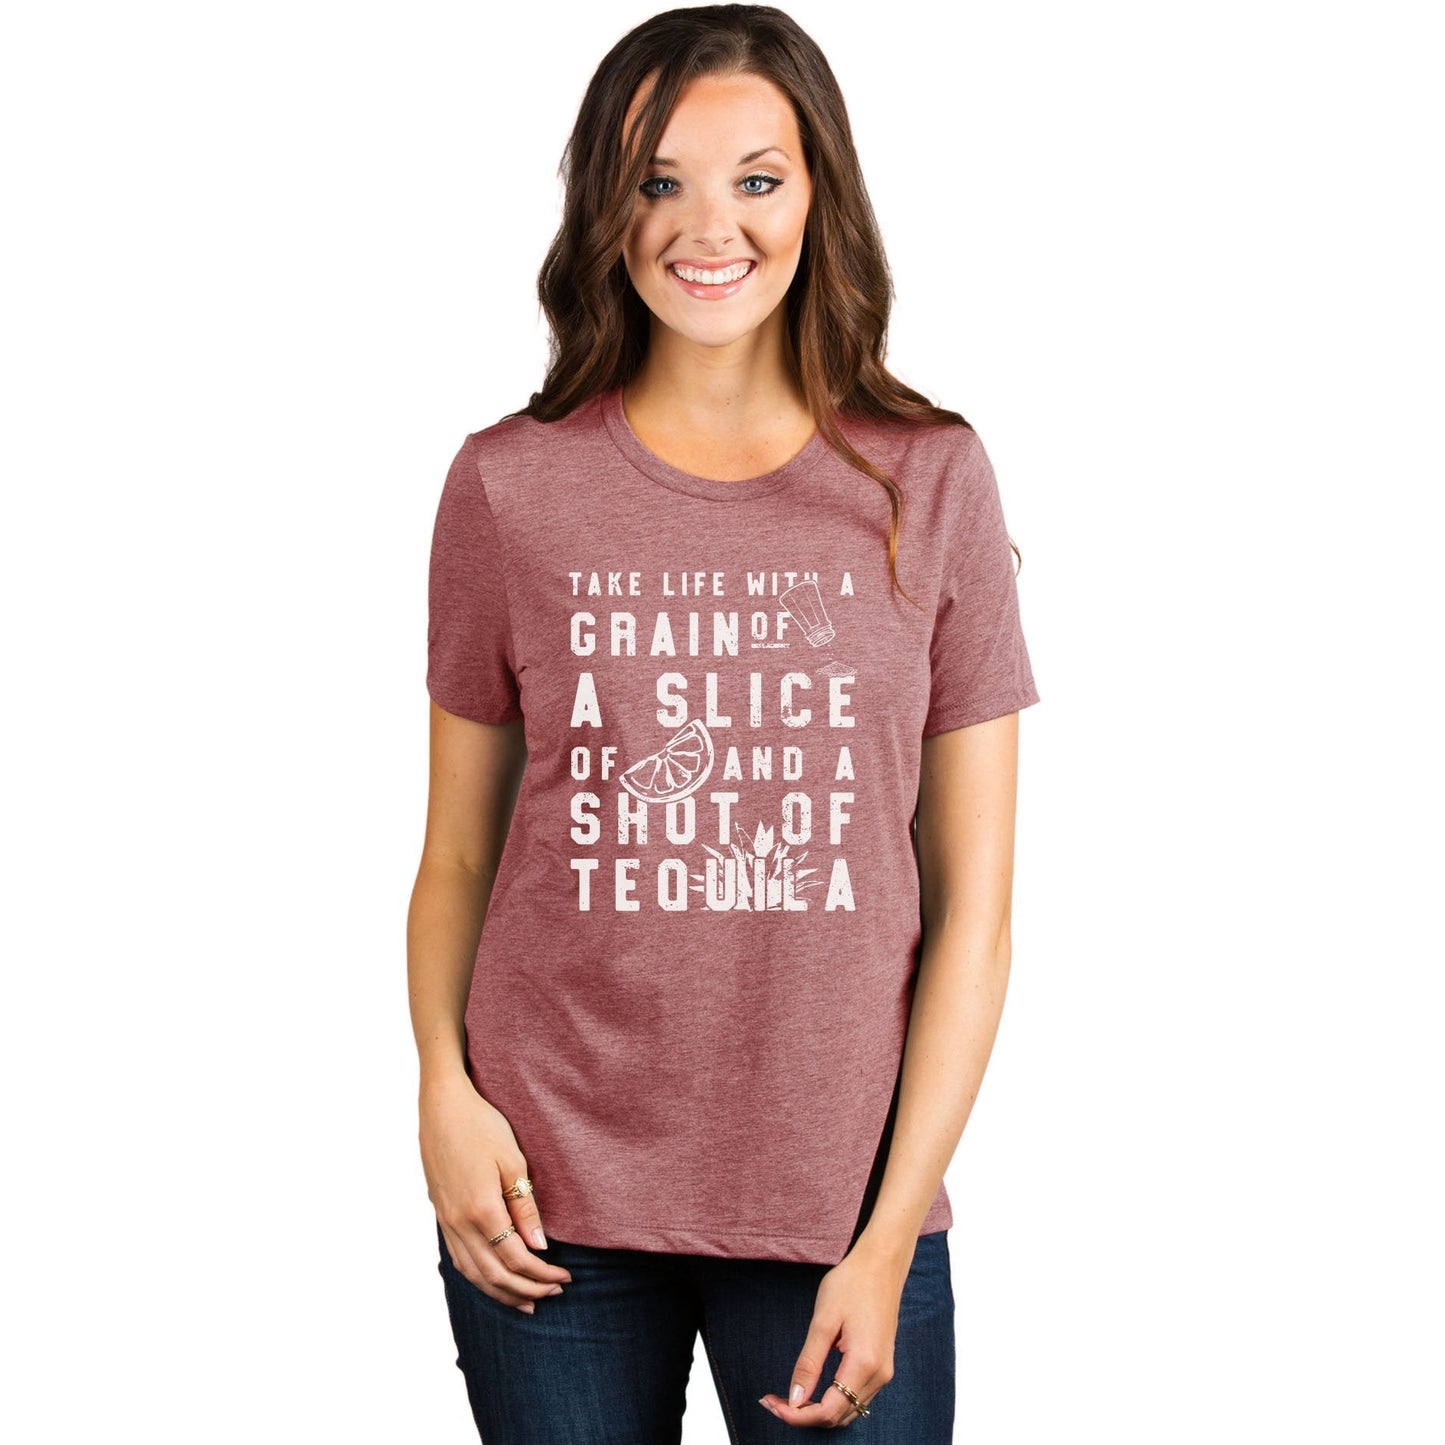 Grain Of Salt Slice Of Lime Shot Of Tequila Women's Relaxed Crewneck T-Shirt Top Tee Heather Rouge Model
